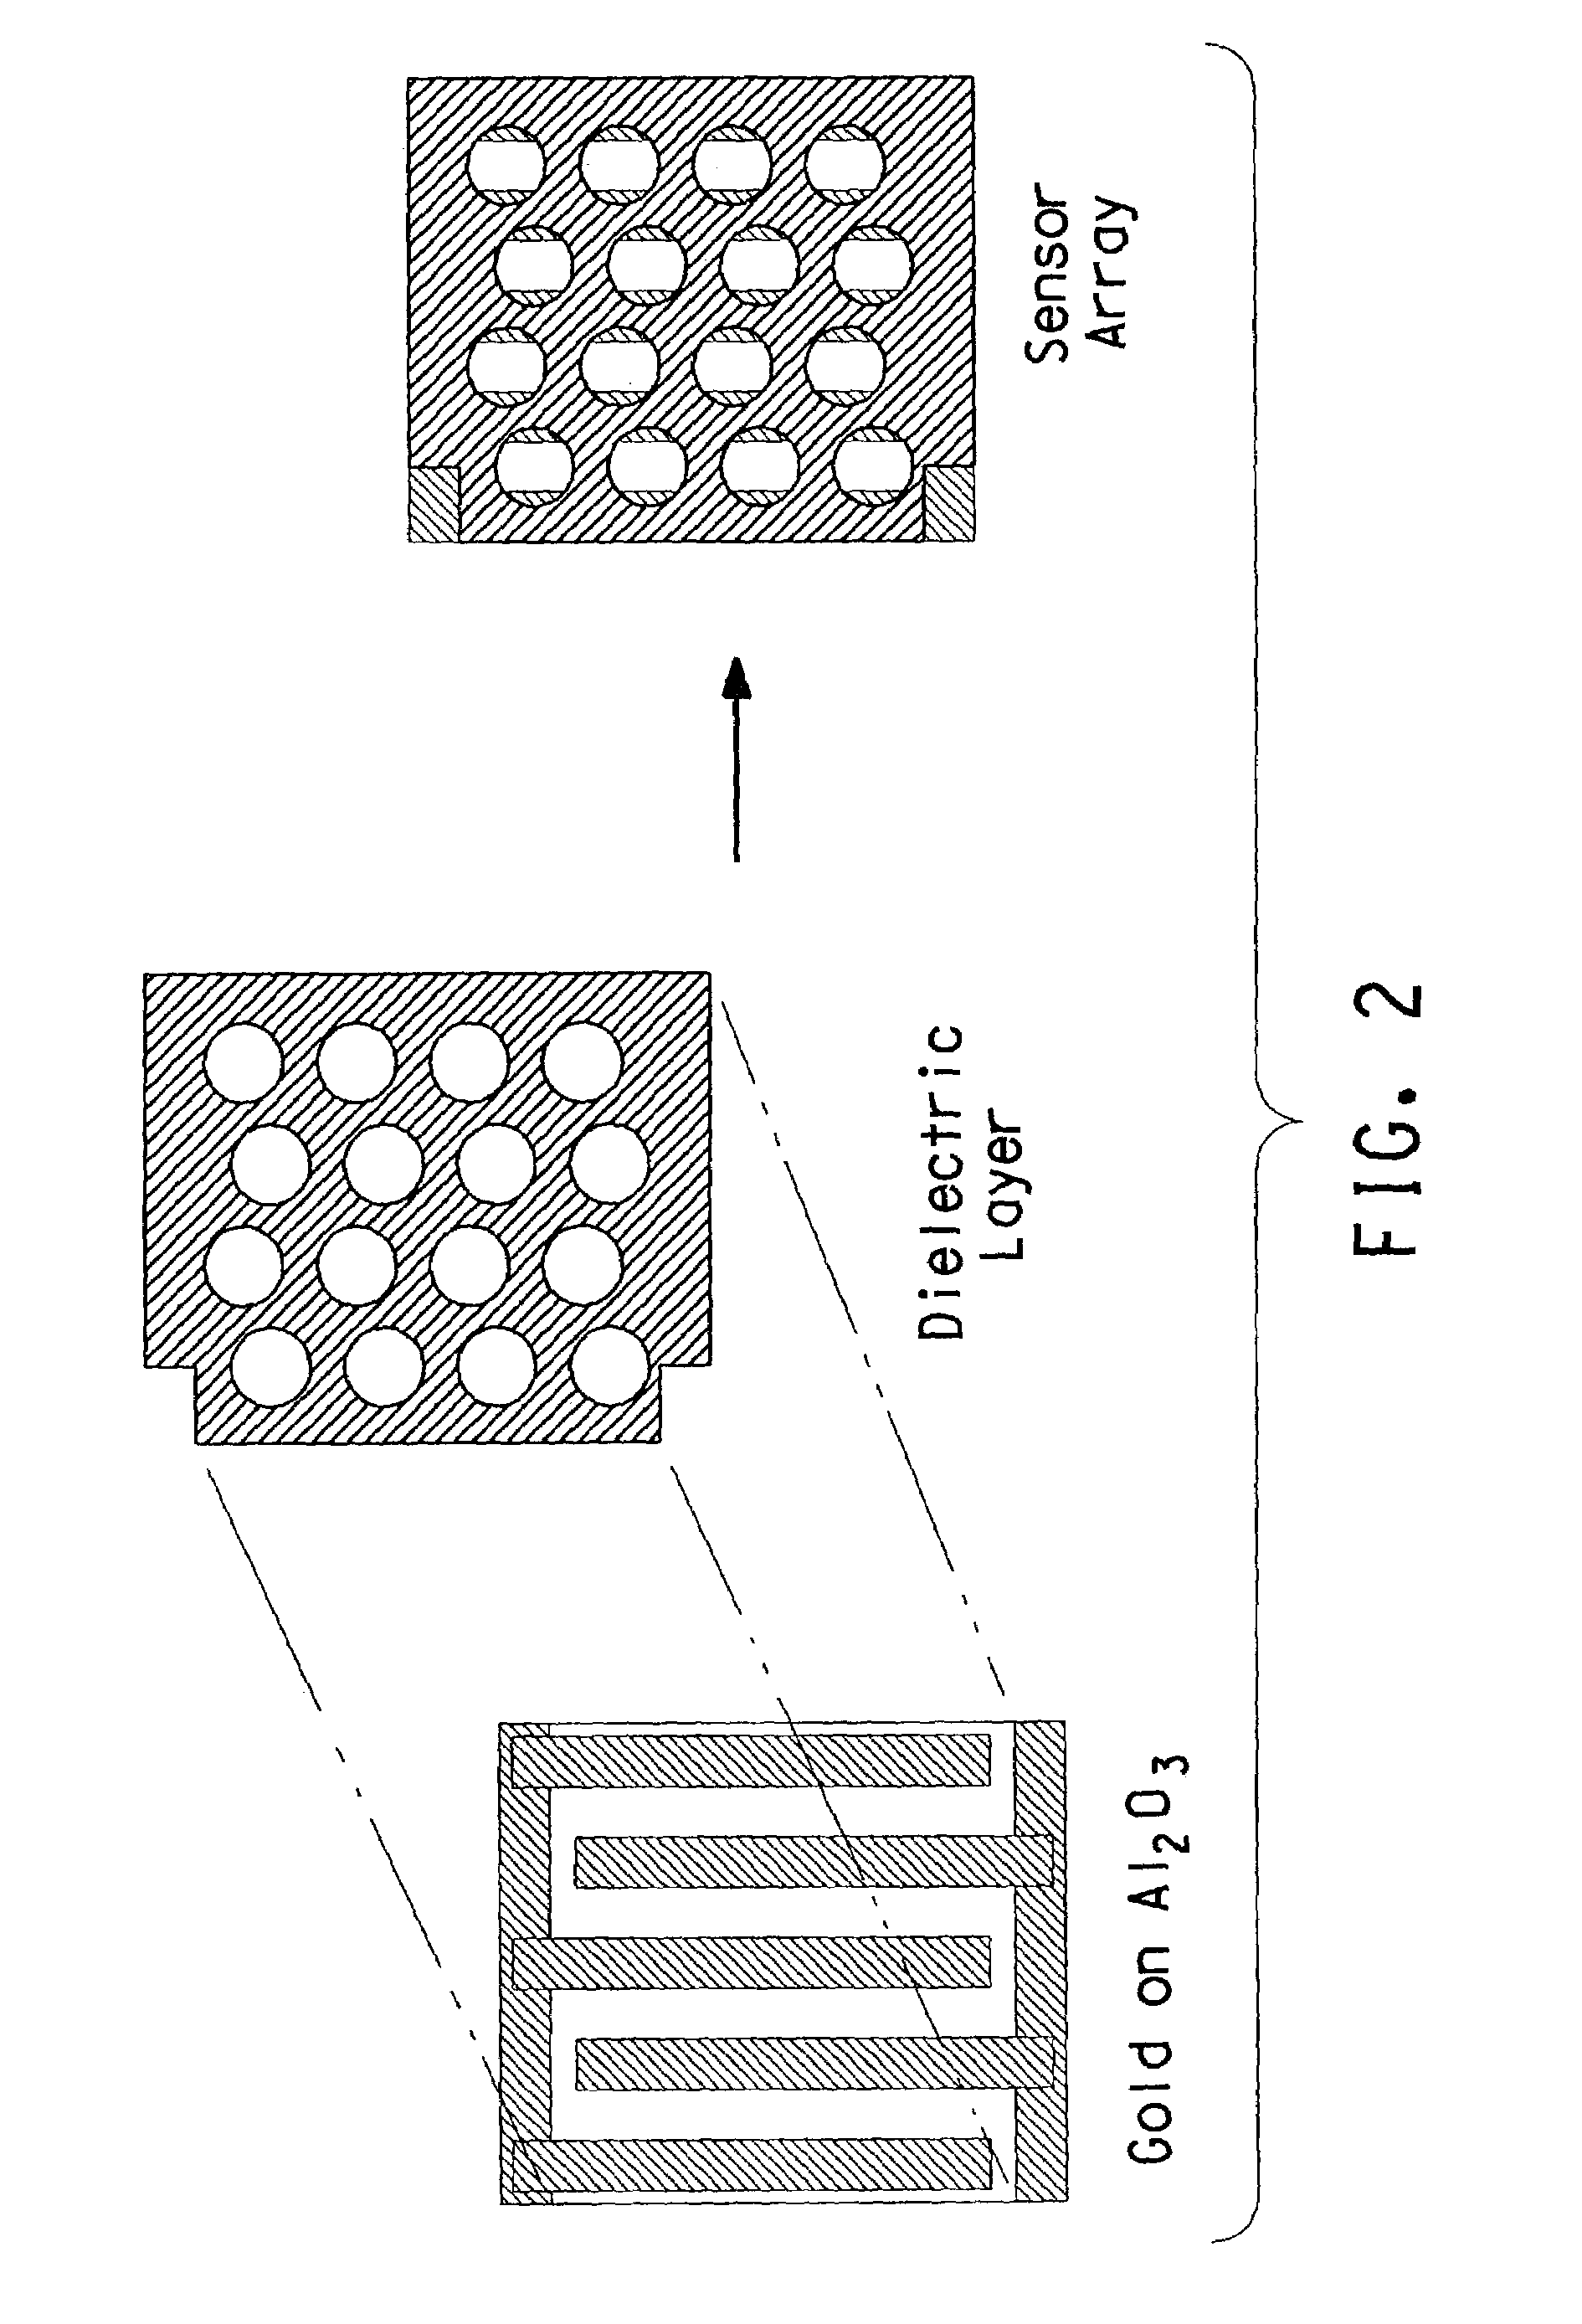 Method and apparatus for controlling a gas-emitting process and related devices